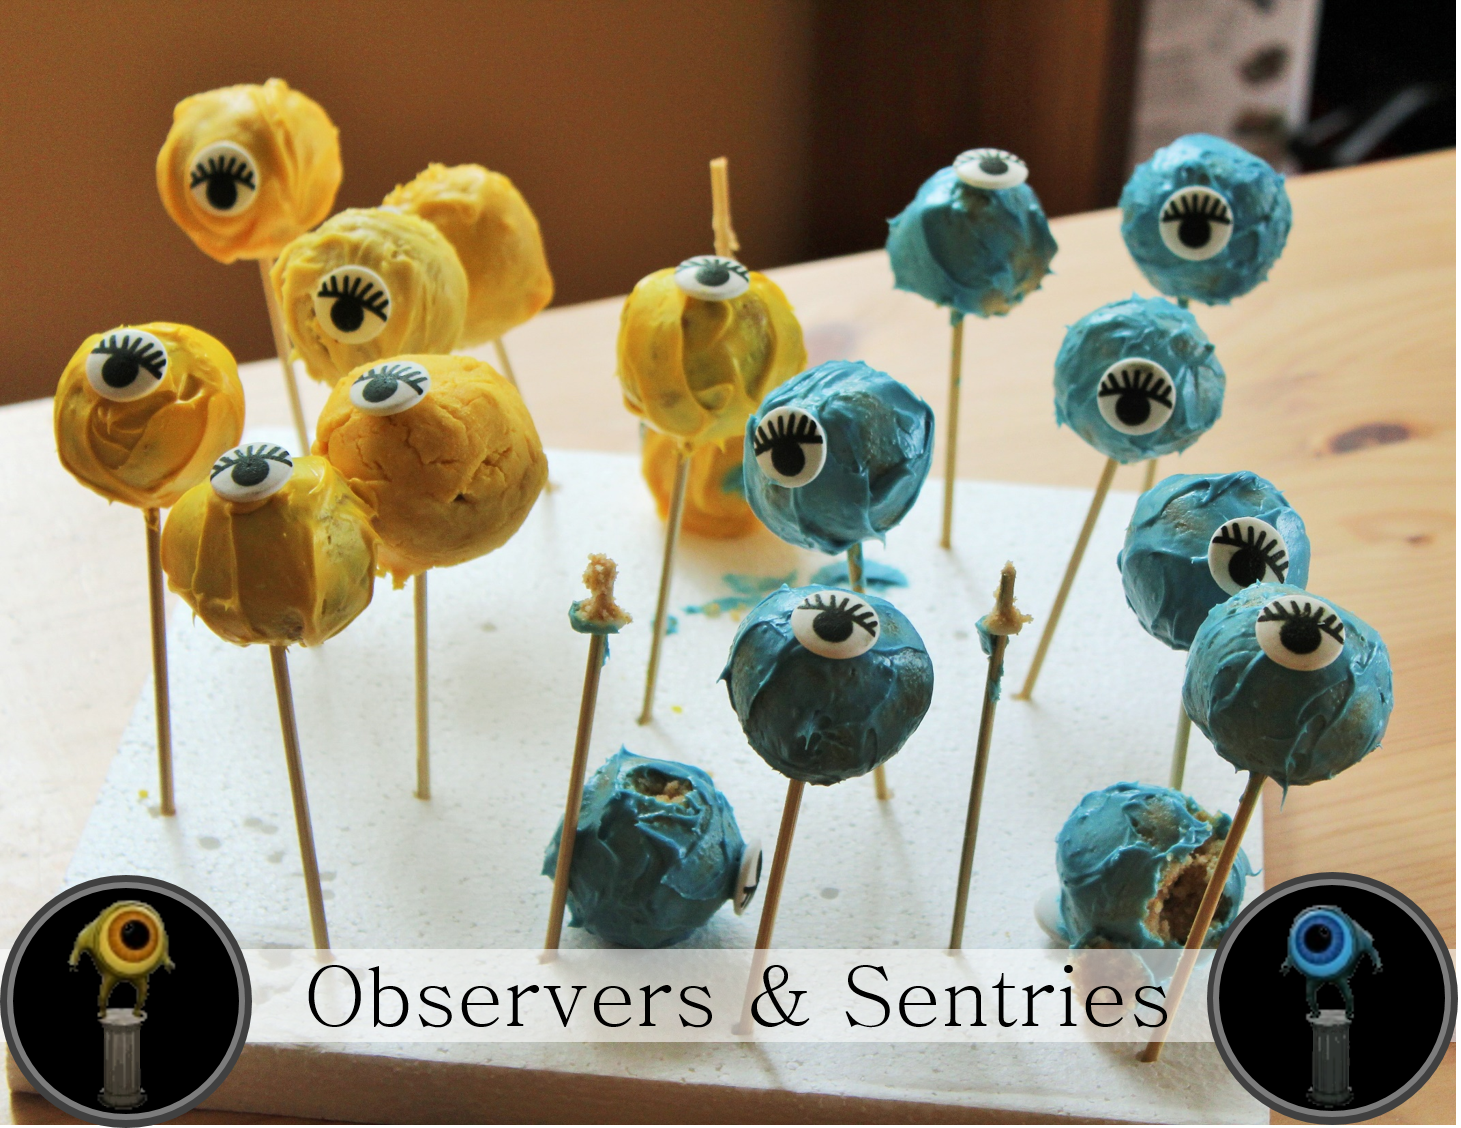 Blue and Yellow cake pops with candy eyes make adorable observers and sentry wards.